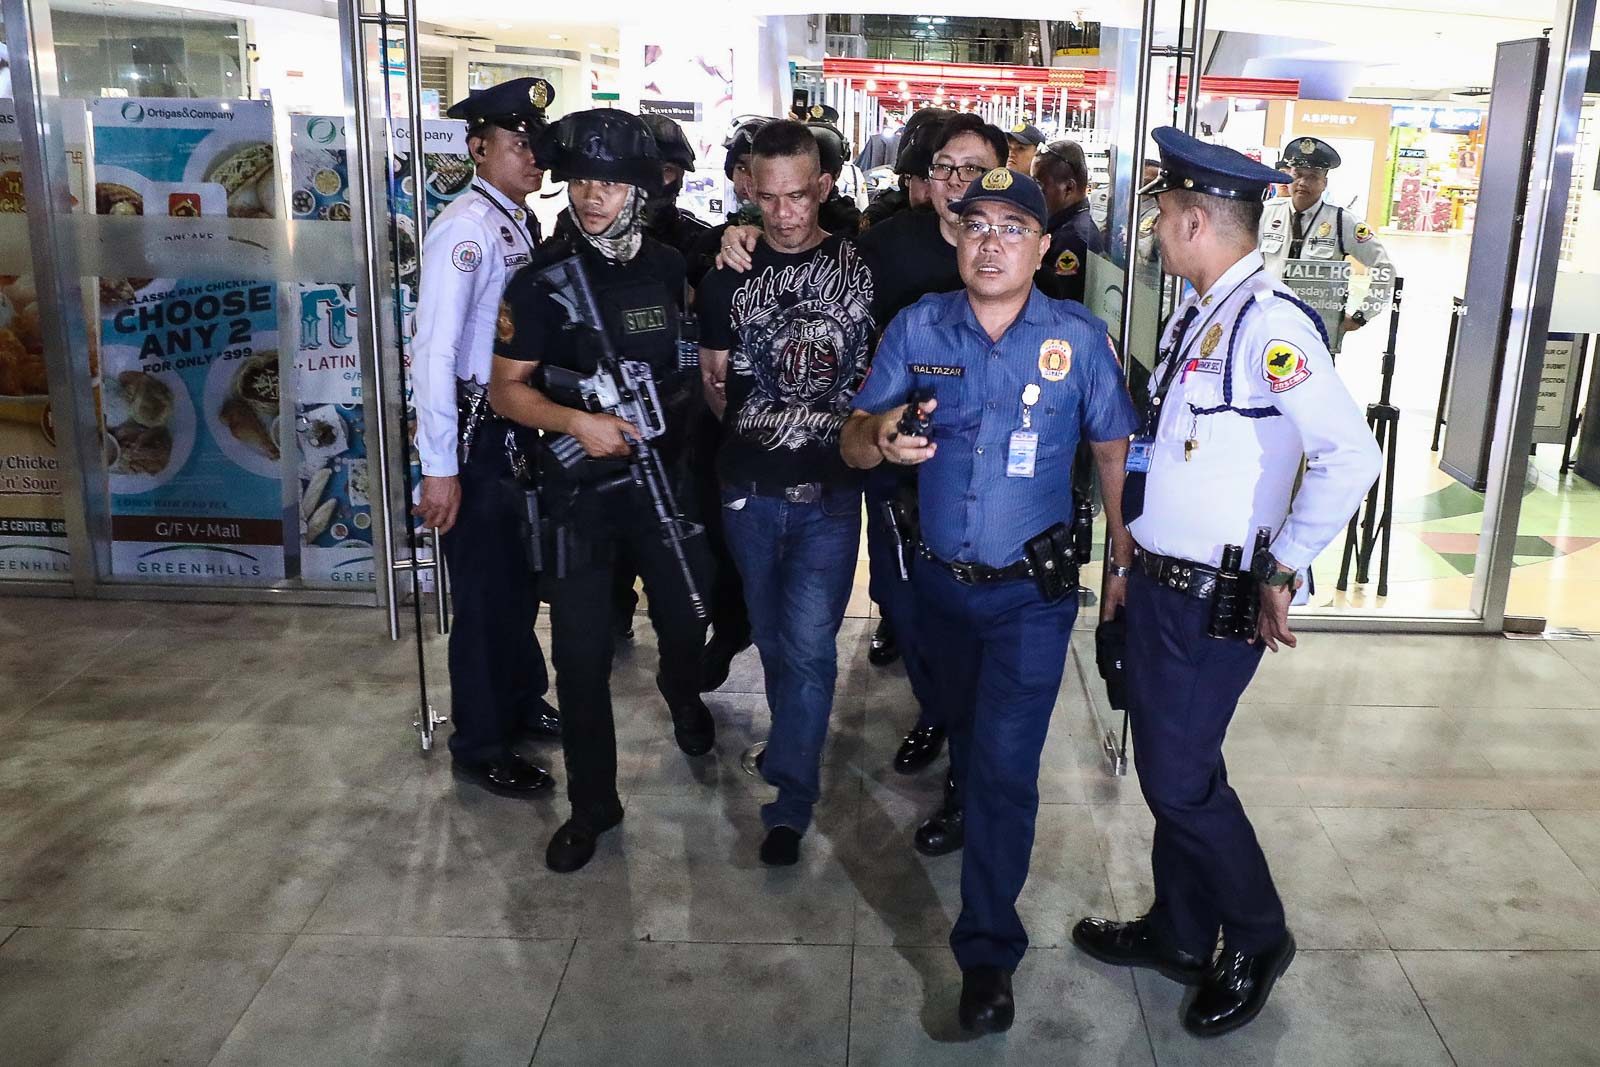 TIMELINE: Hostage-taking incident in Greenhills mall